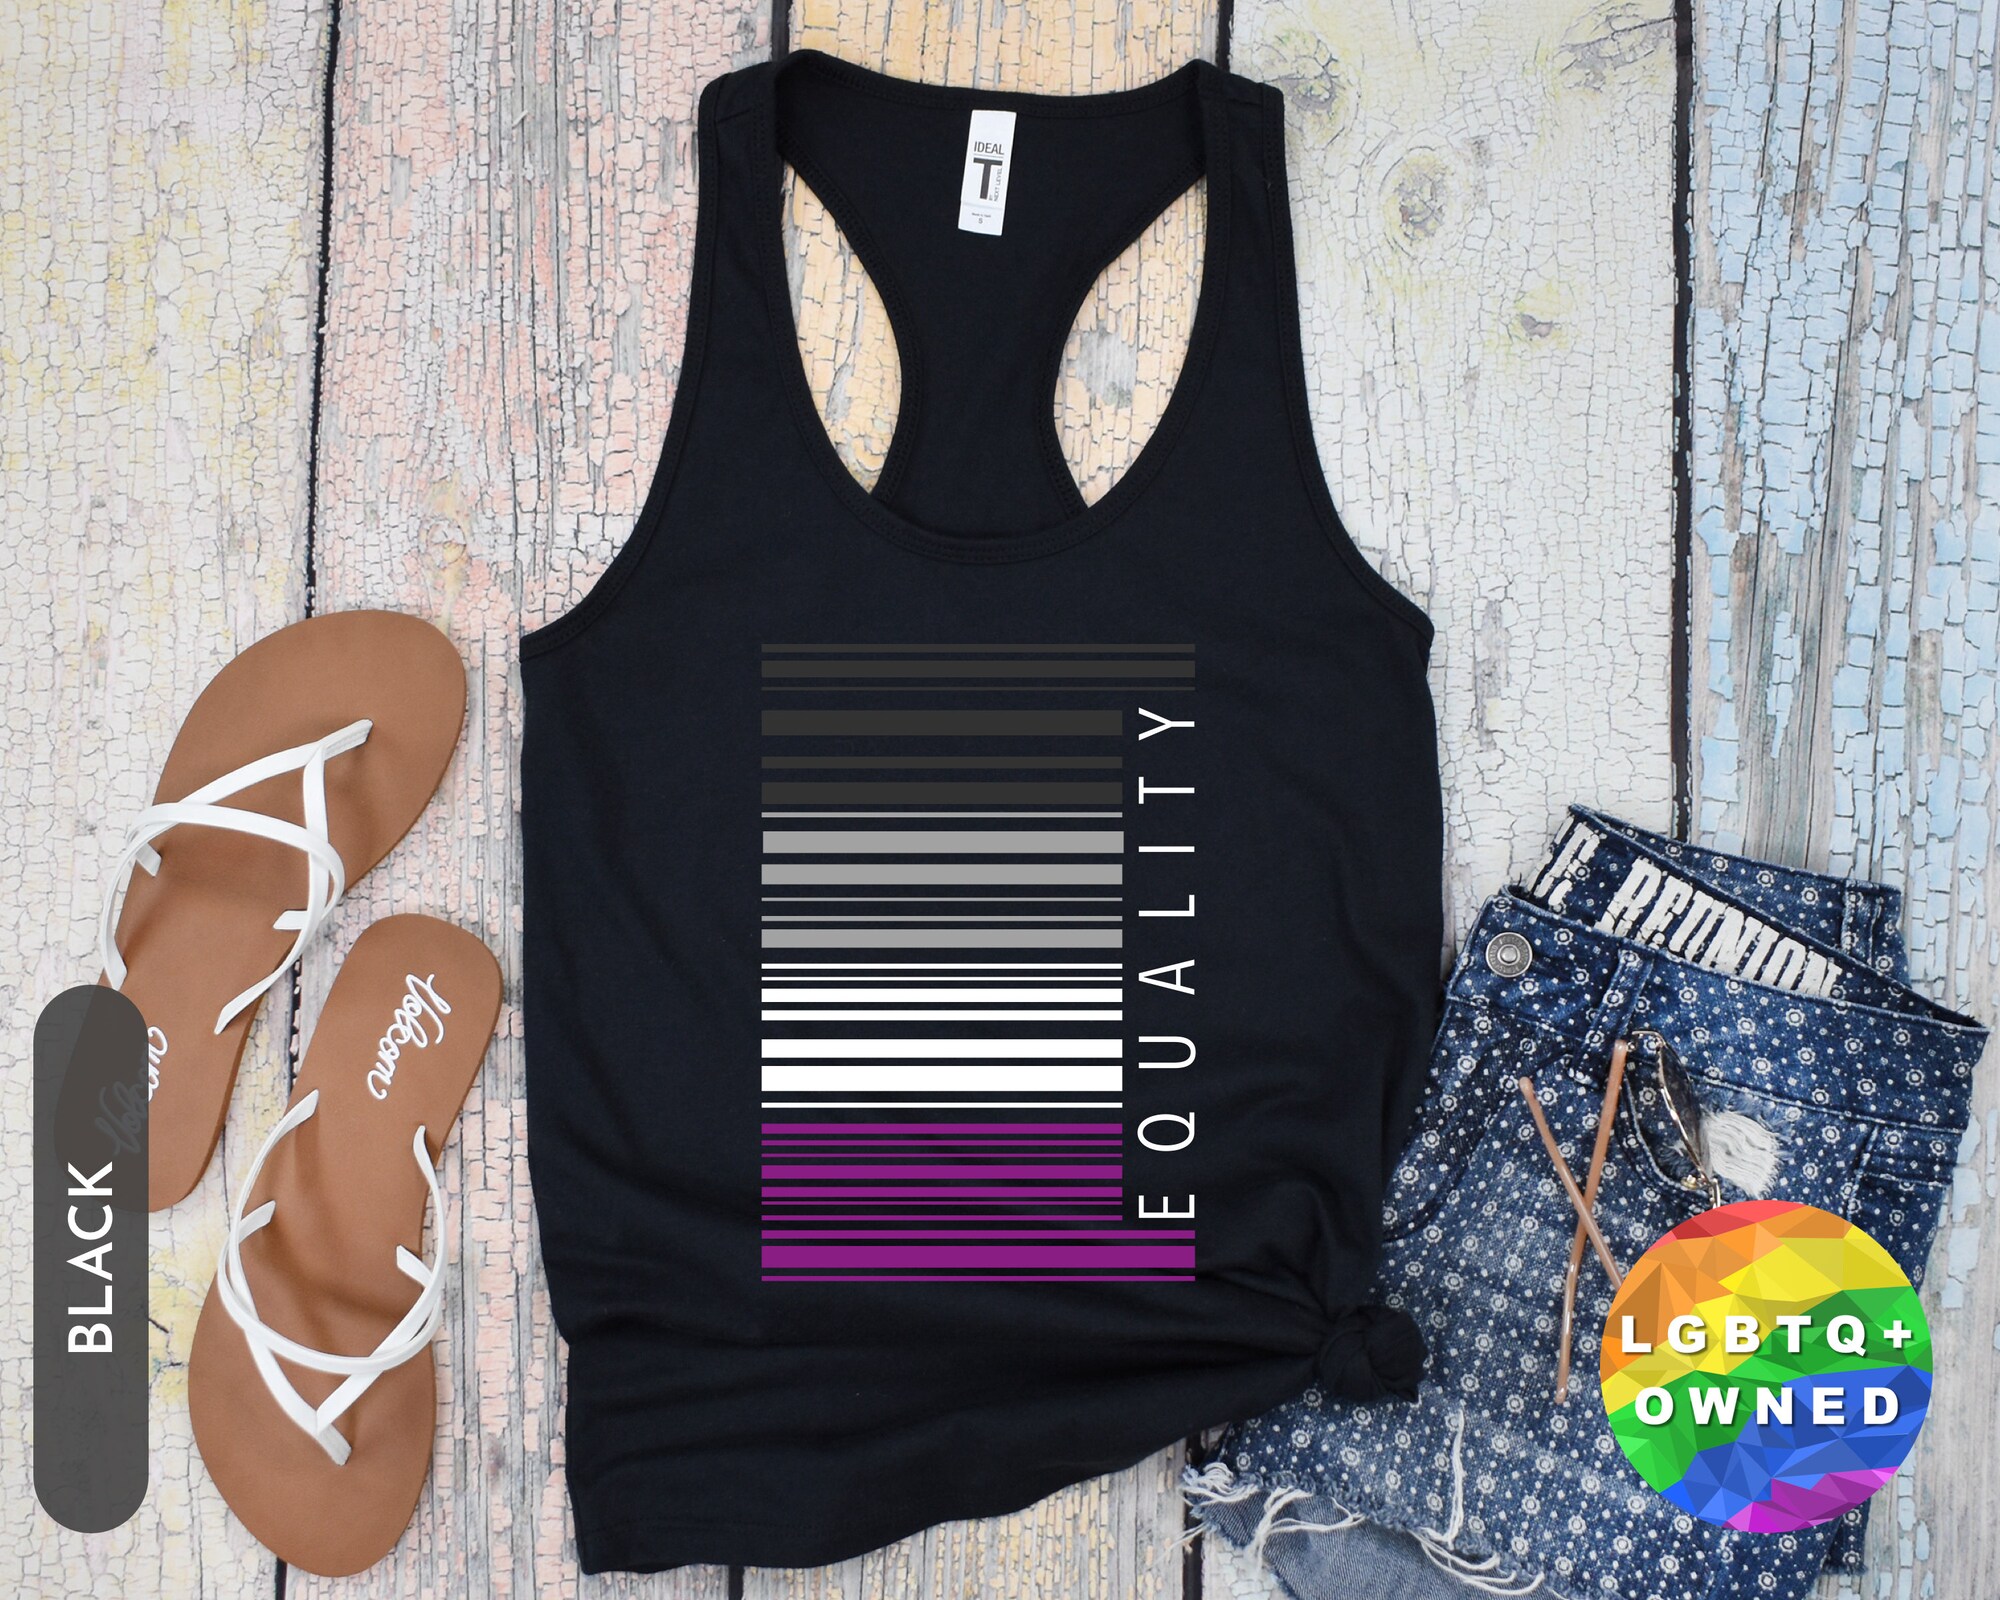 Discover Equality Asexual Flag Racerback Tank Top - Asexual Pride Tank Top, Subtle Asexual